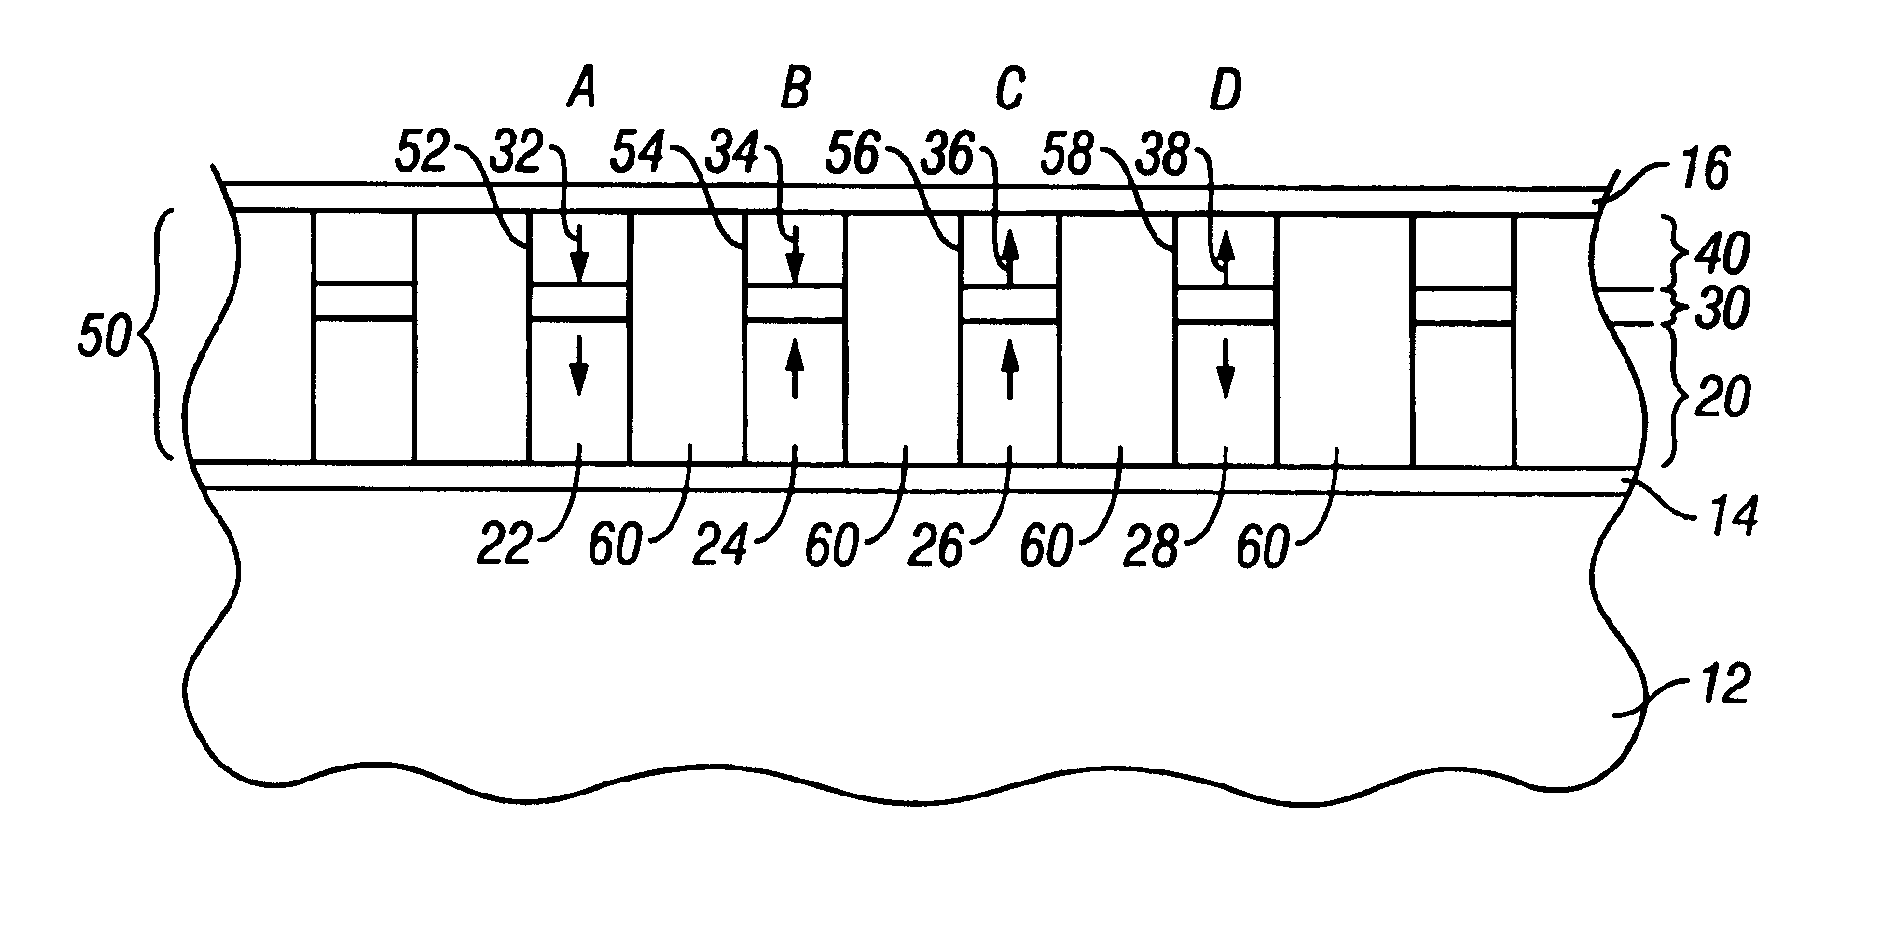 Method for magnetic recording on patterned multilevel perpendicular media using thermal assistance and fixed write current